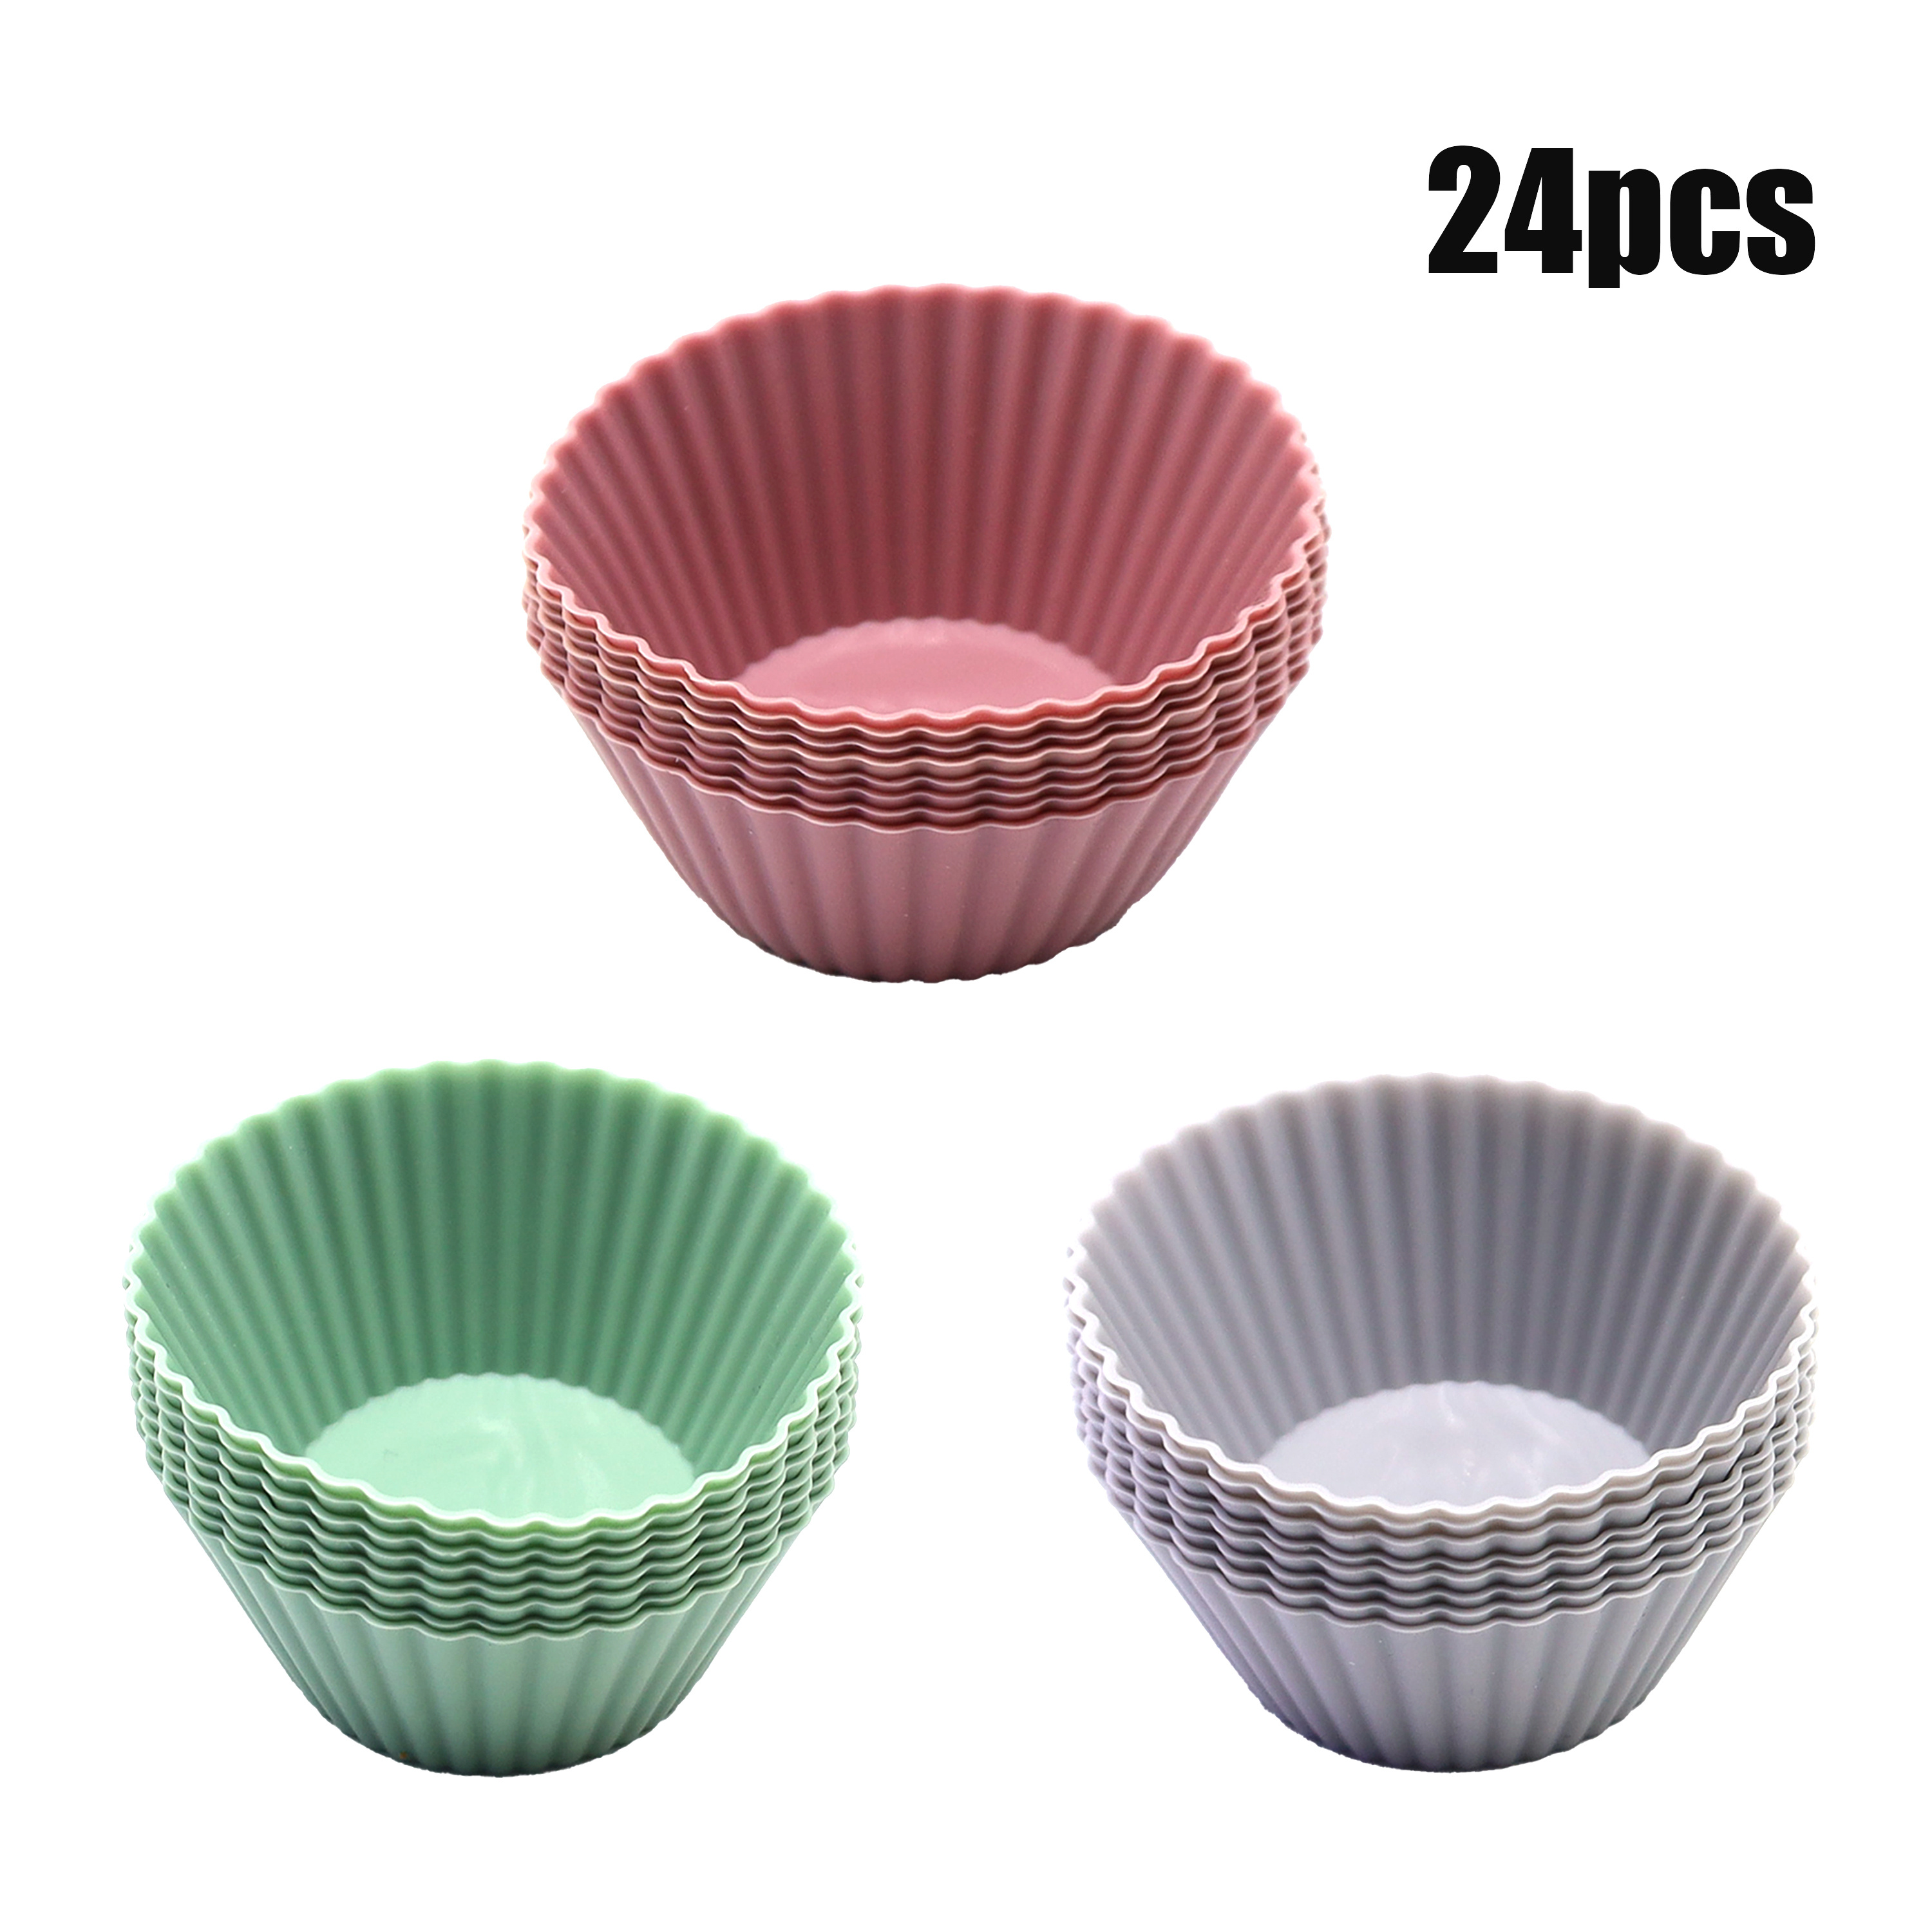 Reusable Silicone Muffin Cups 12Pcs, Non-Sticky, Food Grade